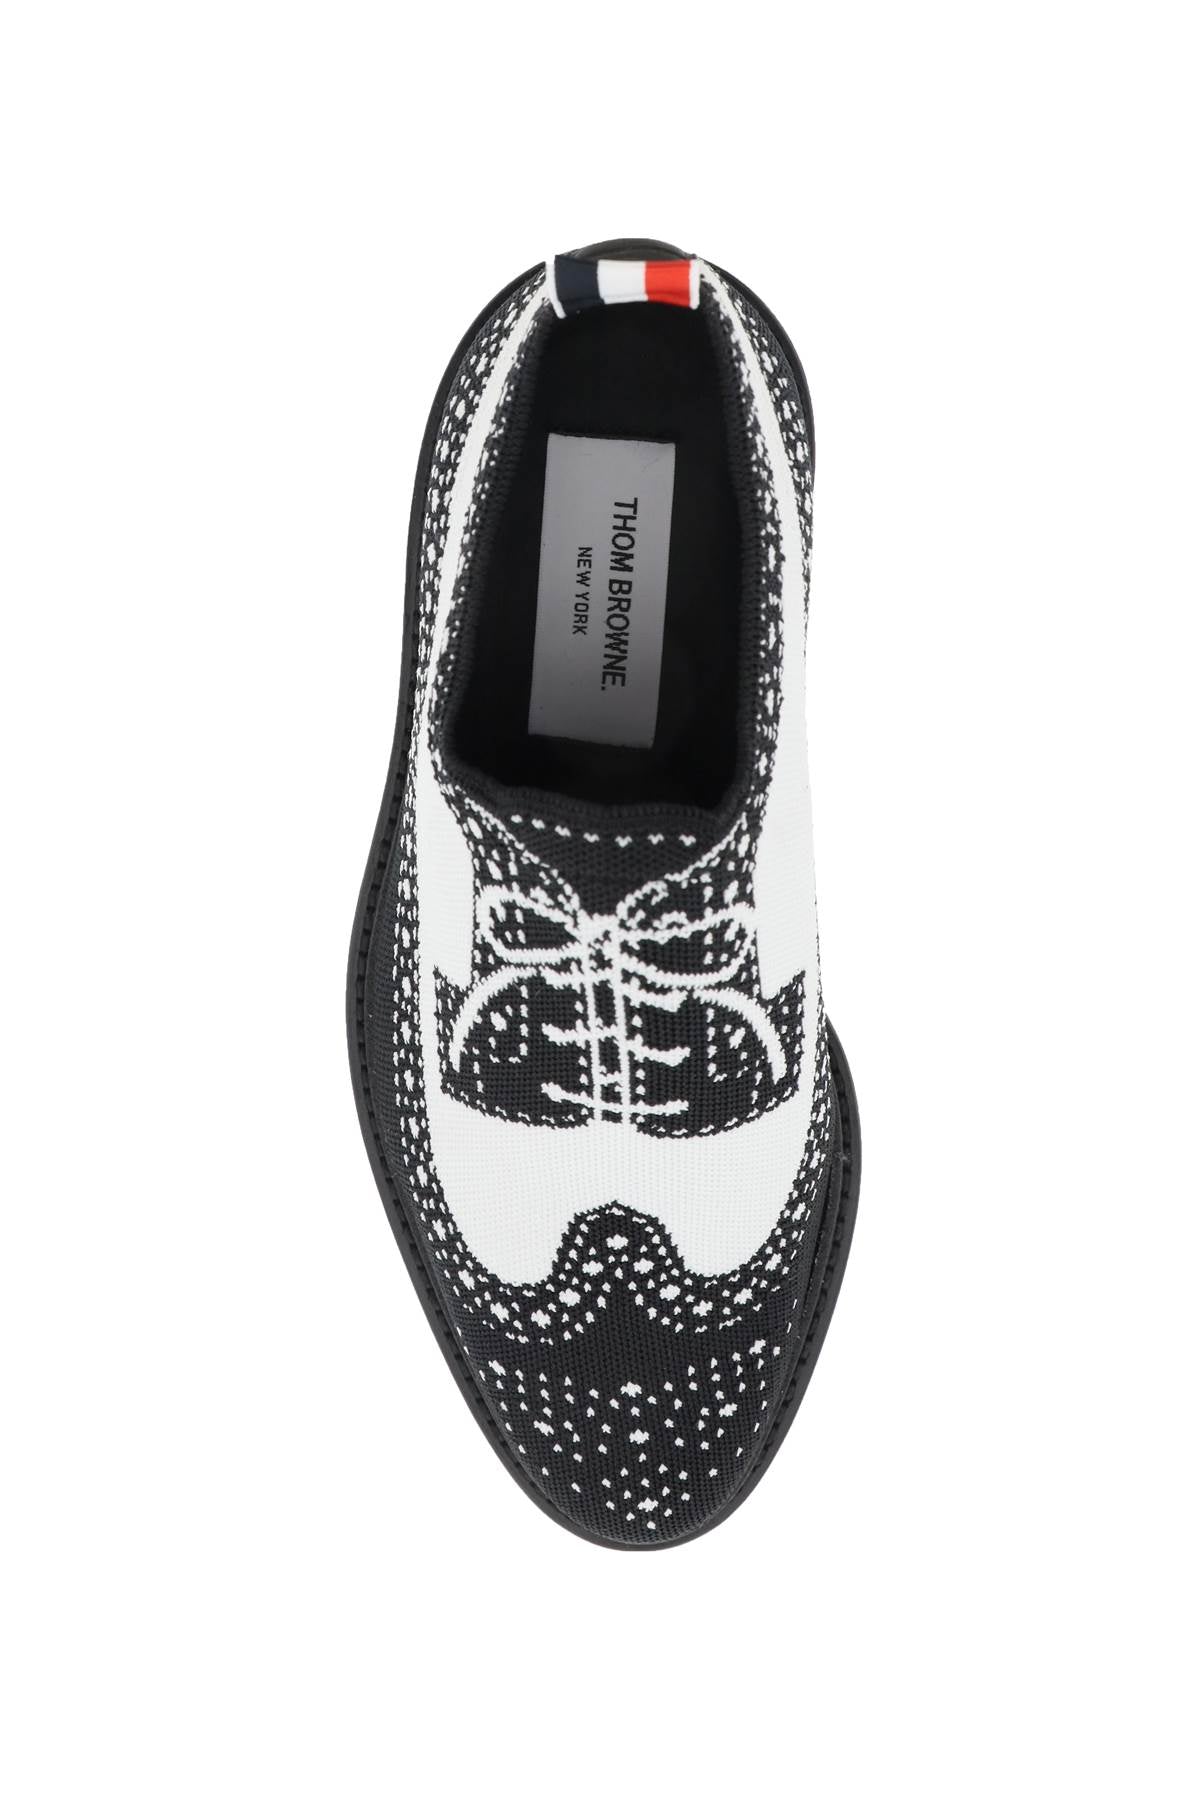 THOM BROWNE Mens Trompe L'oeil Brogue Knit Loafers in Mixed Colors